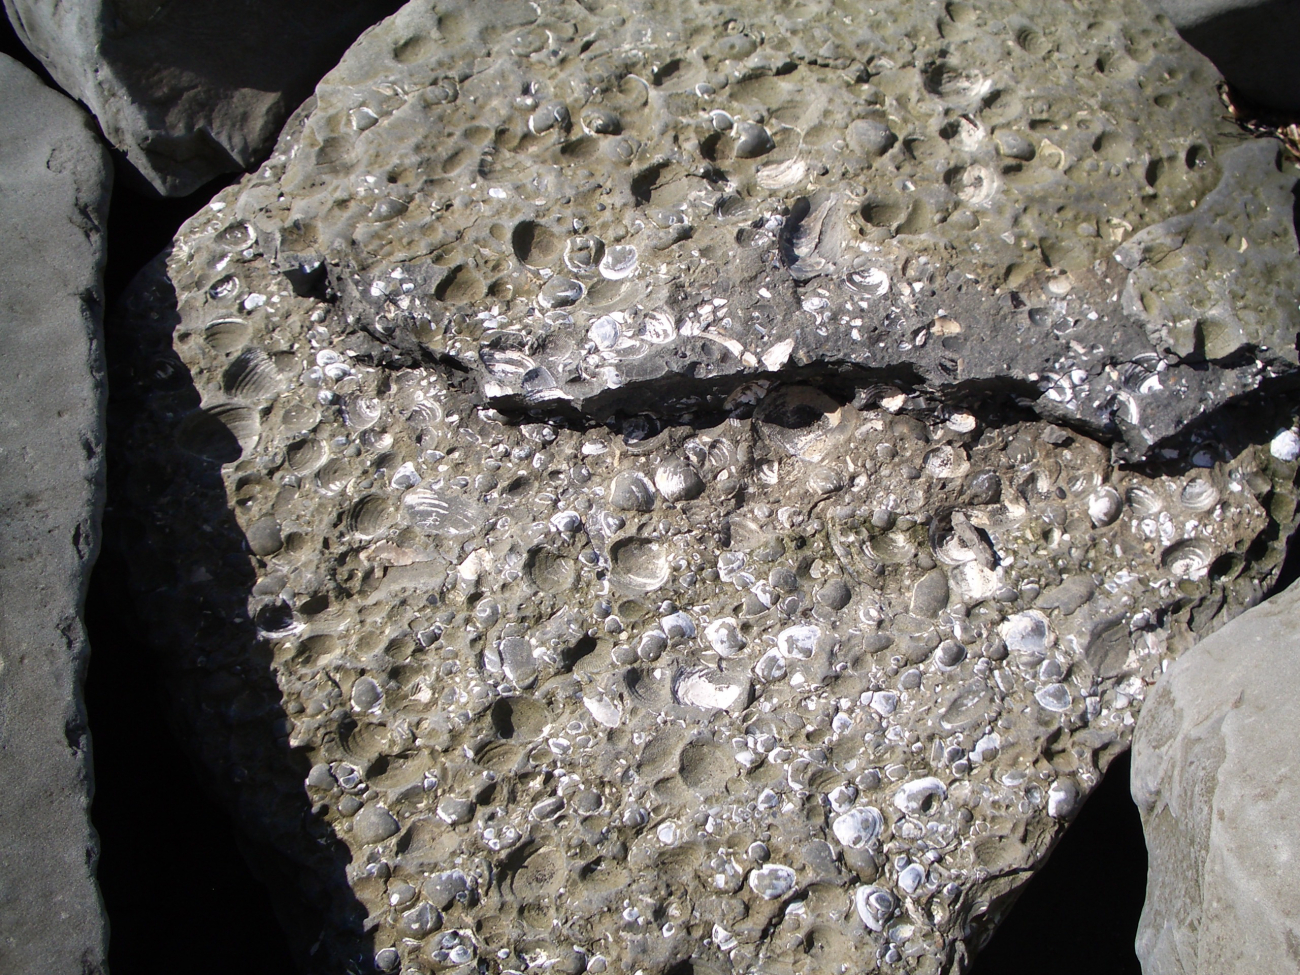 A fossiliferous rock found at Fossil Beach with numerous petrified bivalves